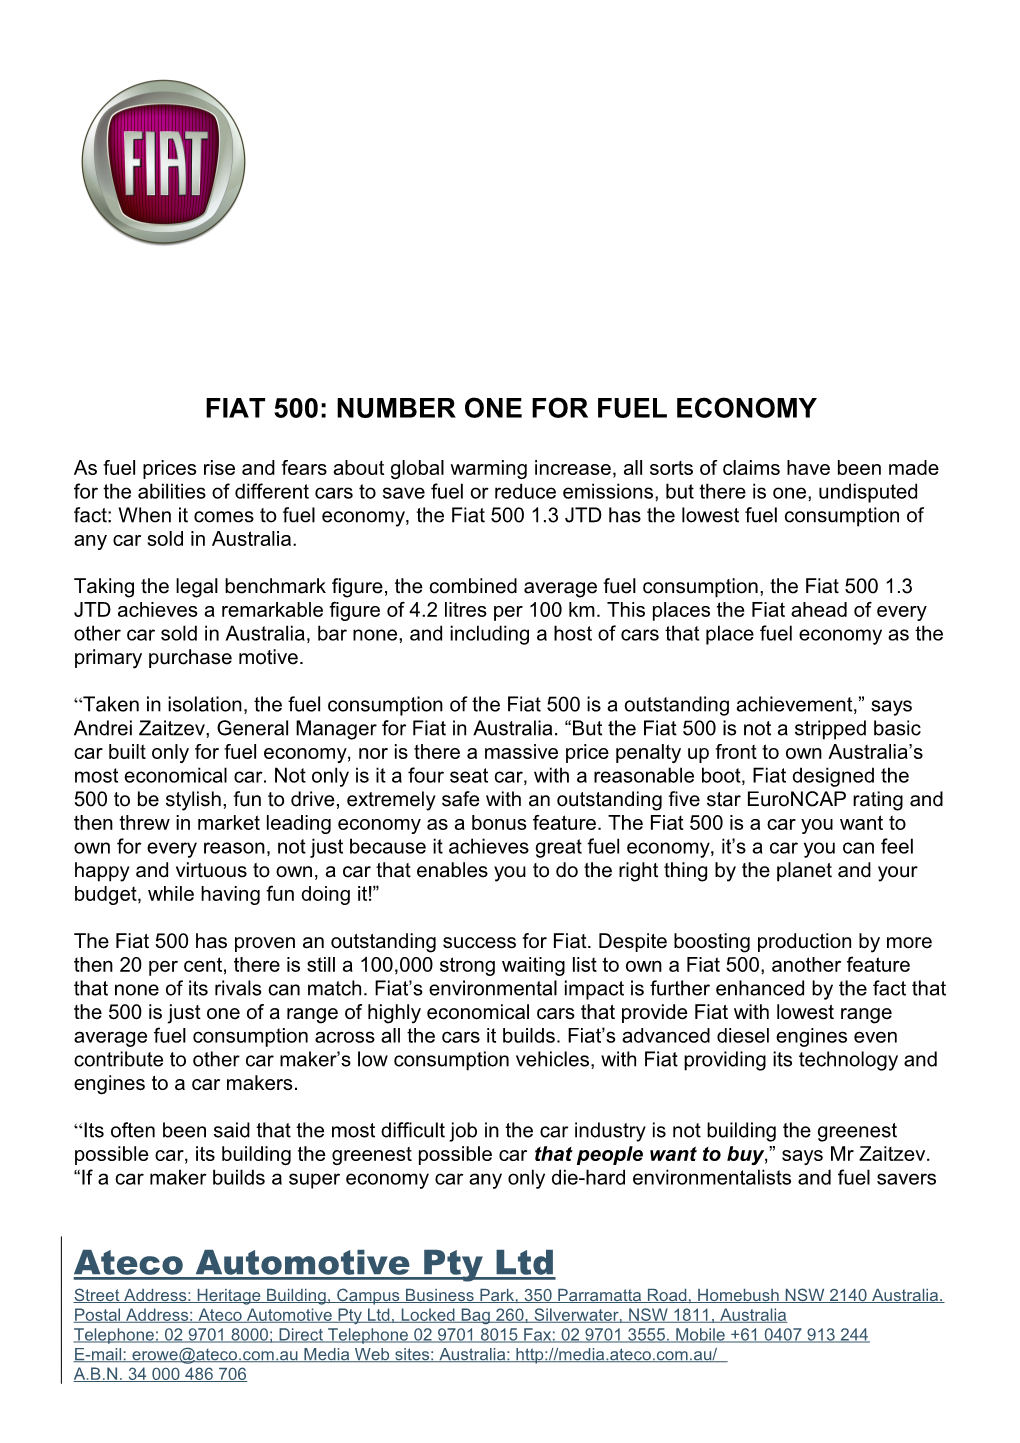 Fiat 500: Number One for Fuel Economy